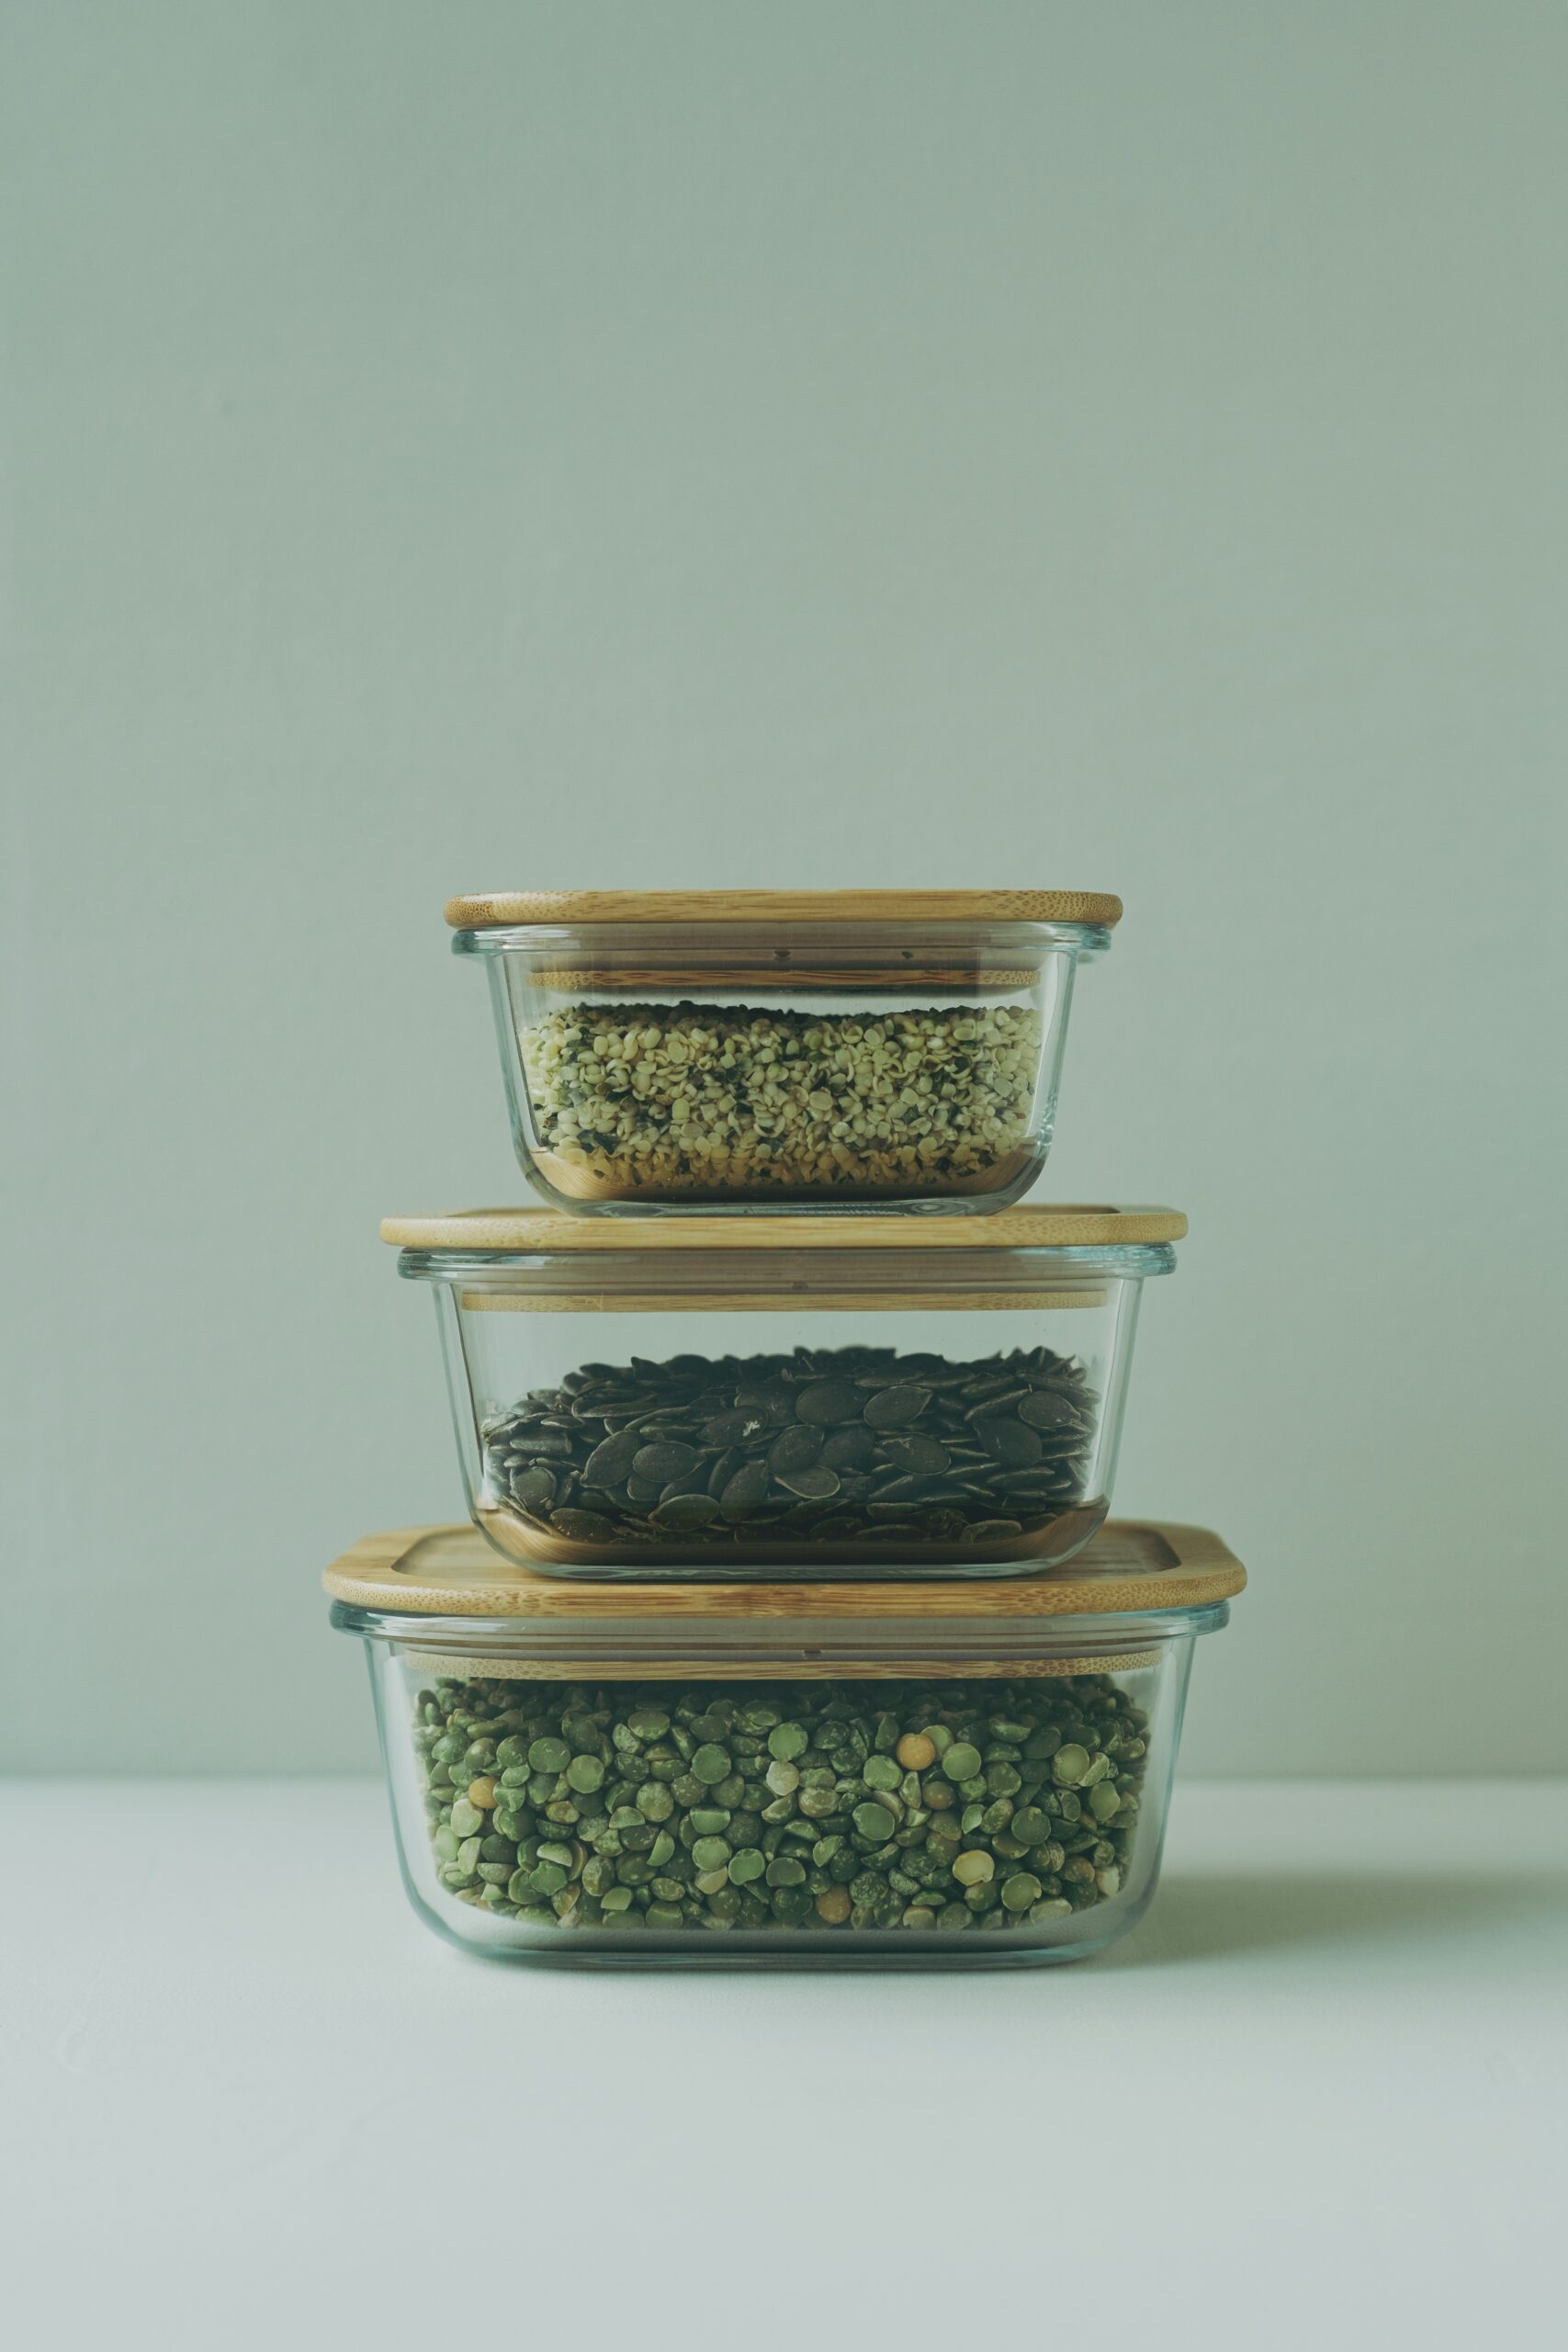 food storage container alternatives. Food stored in glass containers.